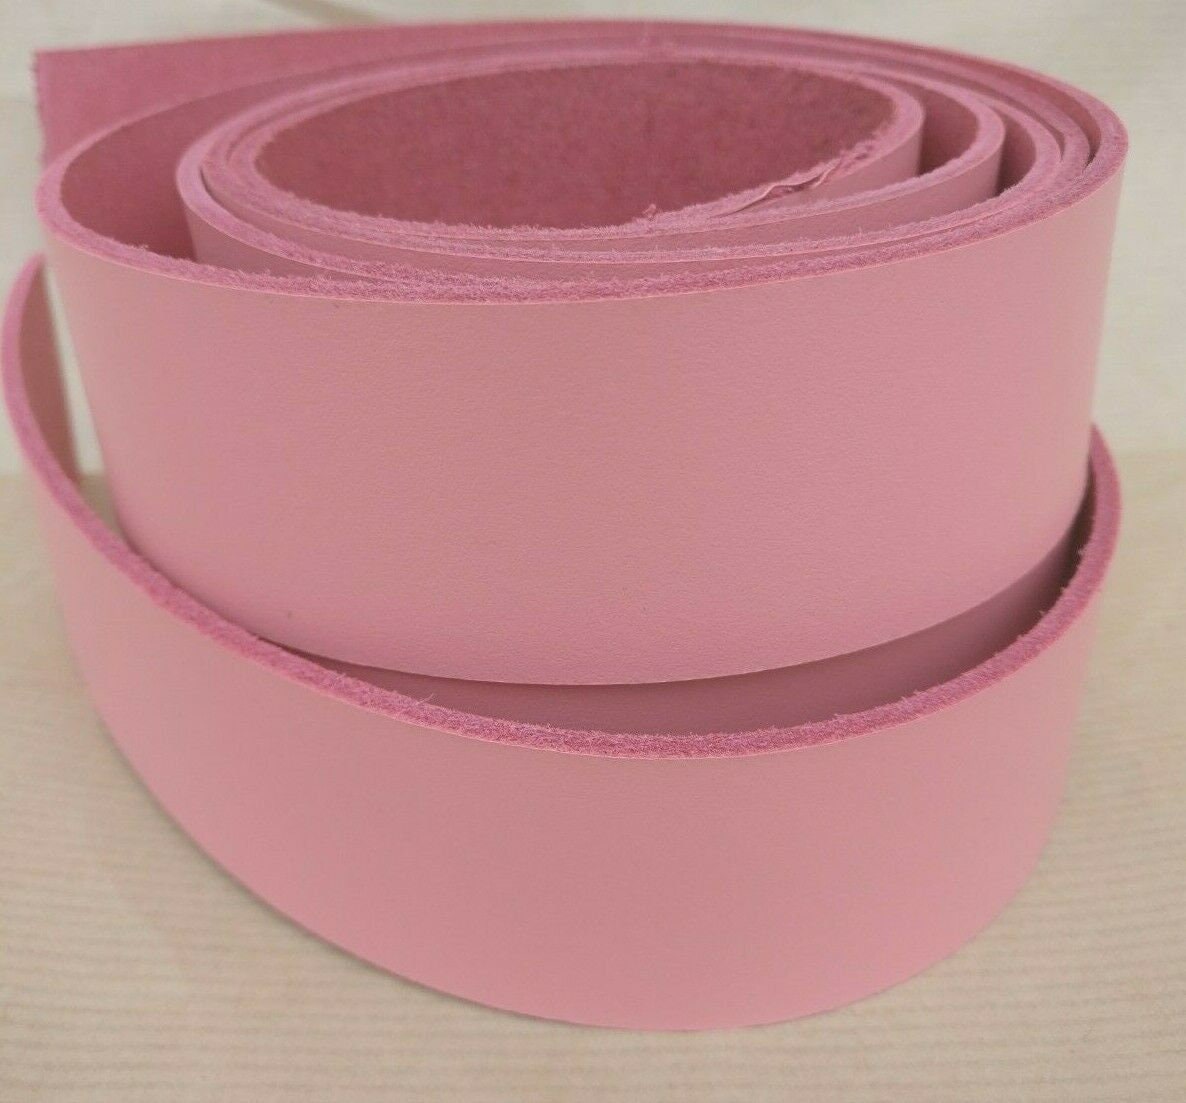 lalatia Faux Leather Straps for Crafts Leather Strips with Stitching 0.6  Inch Wide 2 Yards Long (Light Pink, 0.6''x72'')